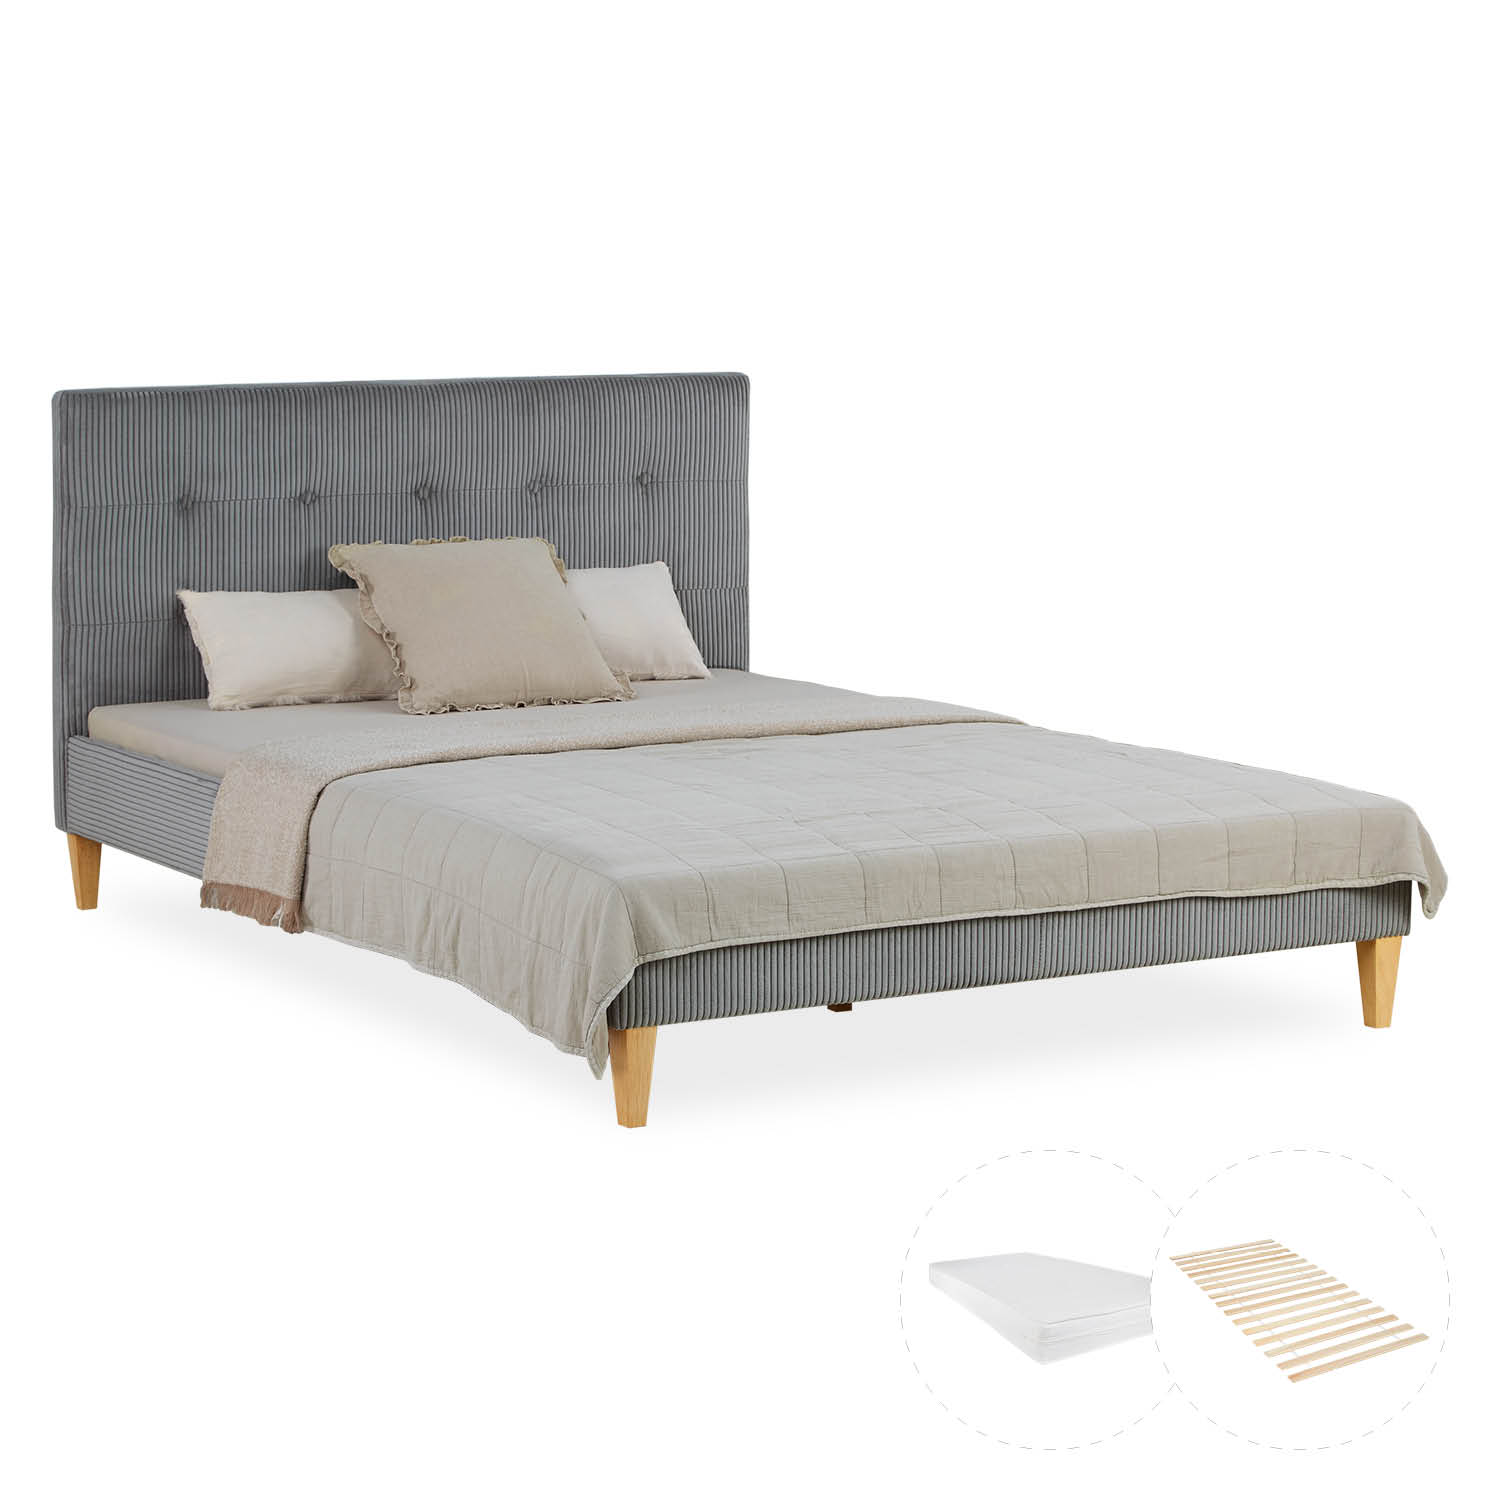 Small Double Bed 140x200 cm with Mattress Upholstered Bed Grey Cord with Slatted Frame Fabric Bed Frame